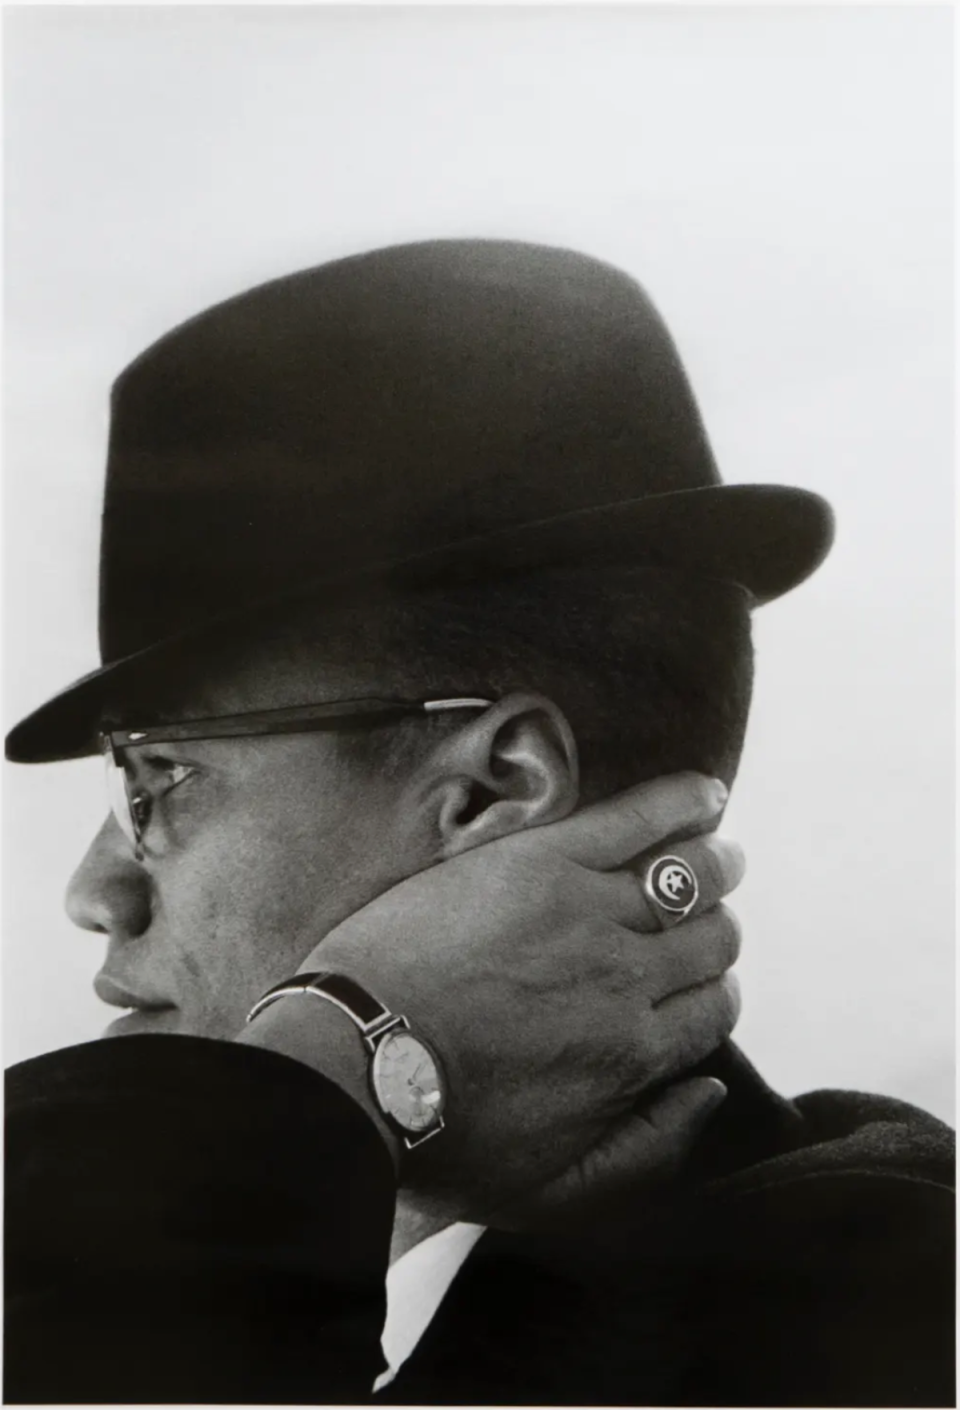 ‘Malcolm X’ by Eve Arnold, 1962 (V&A/Eve Arnold Magnum Photos)